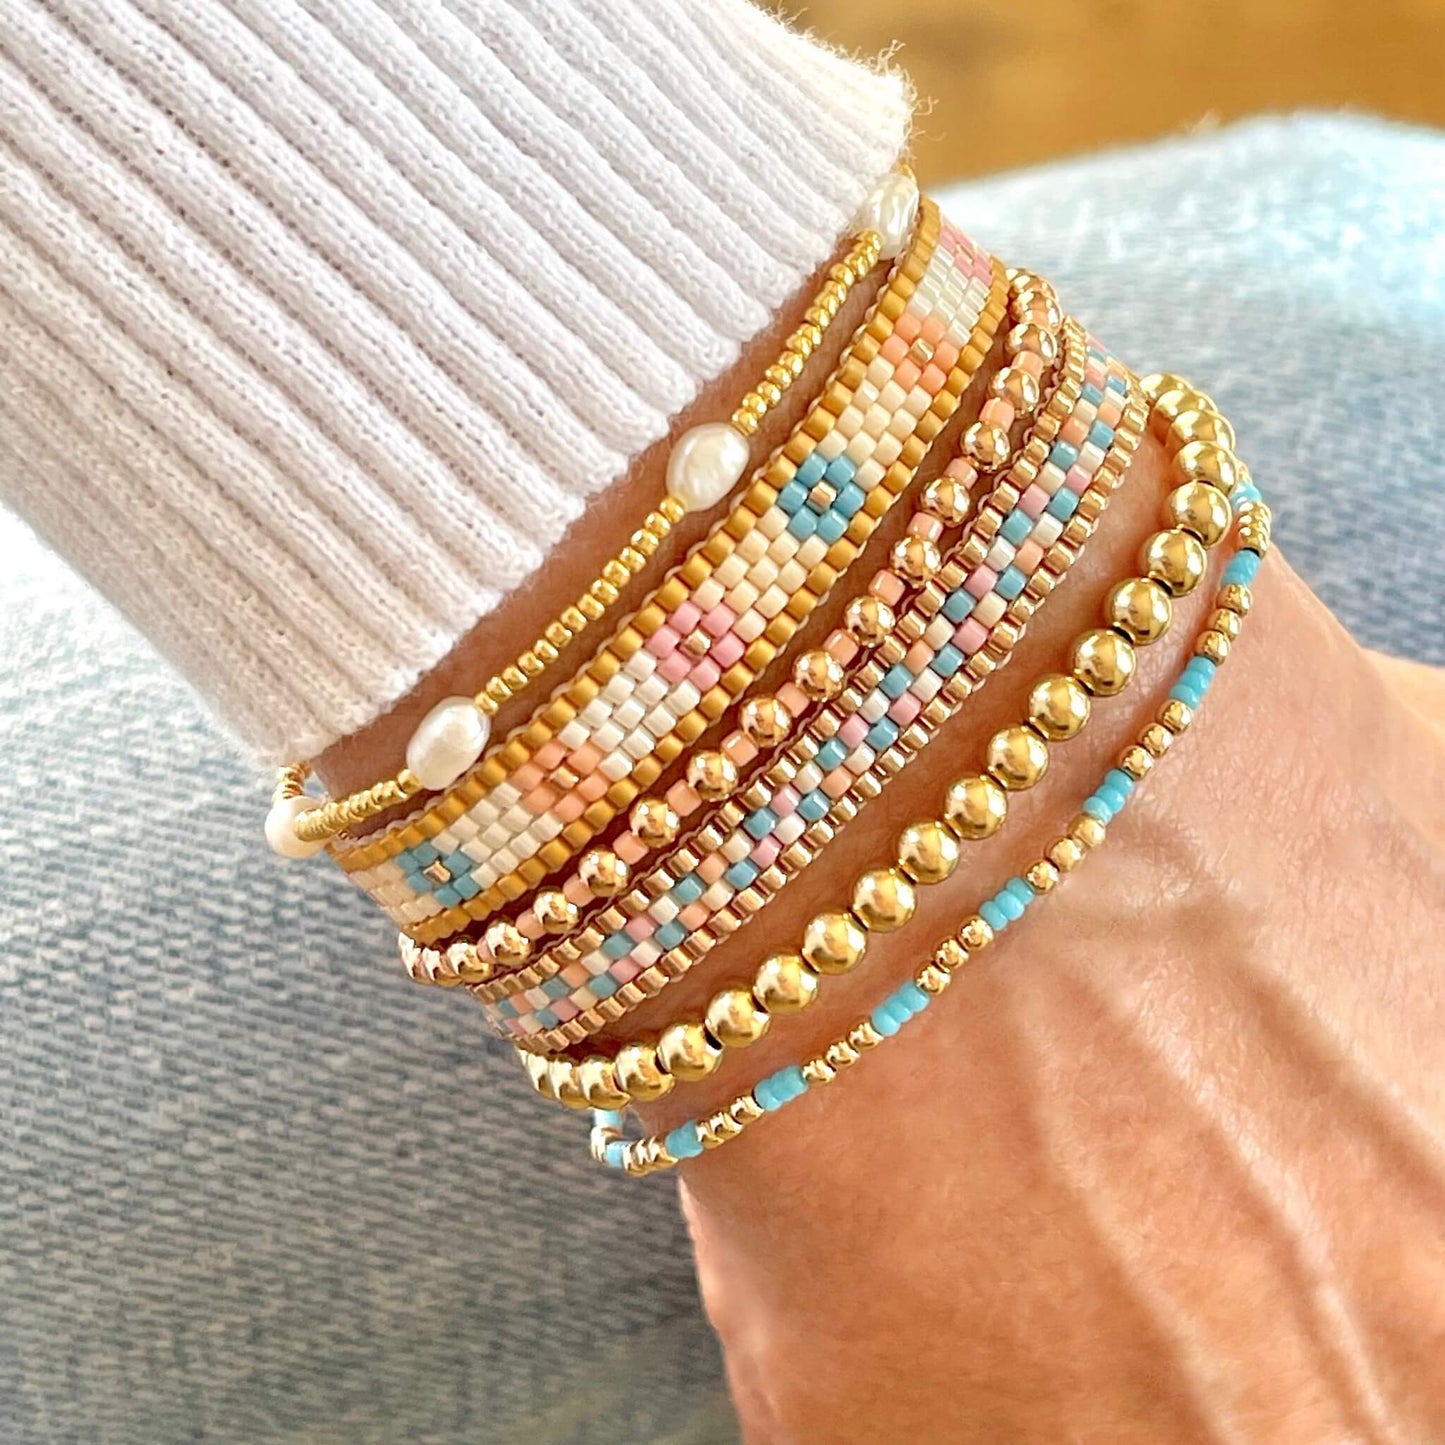 Flower beaded bracelet stack of 6 with 2 woven bands and 4 gold stretch bracelets with pastel seed beads and freshwater pearls.